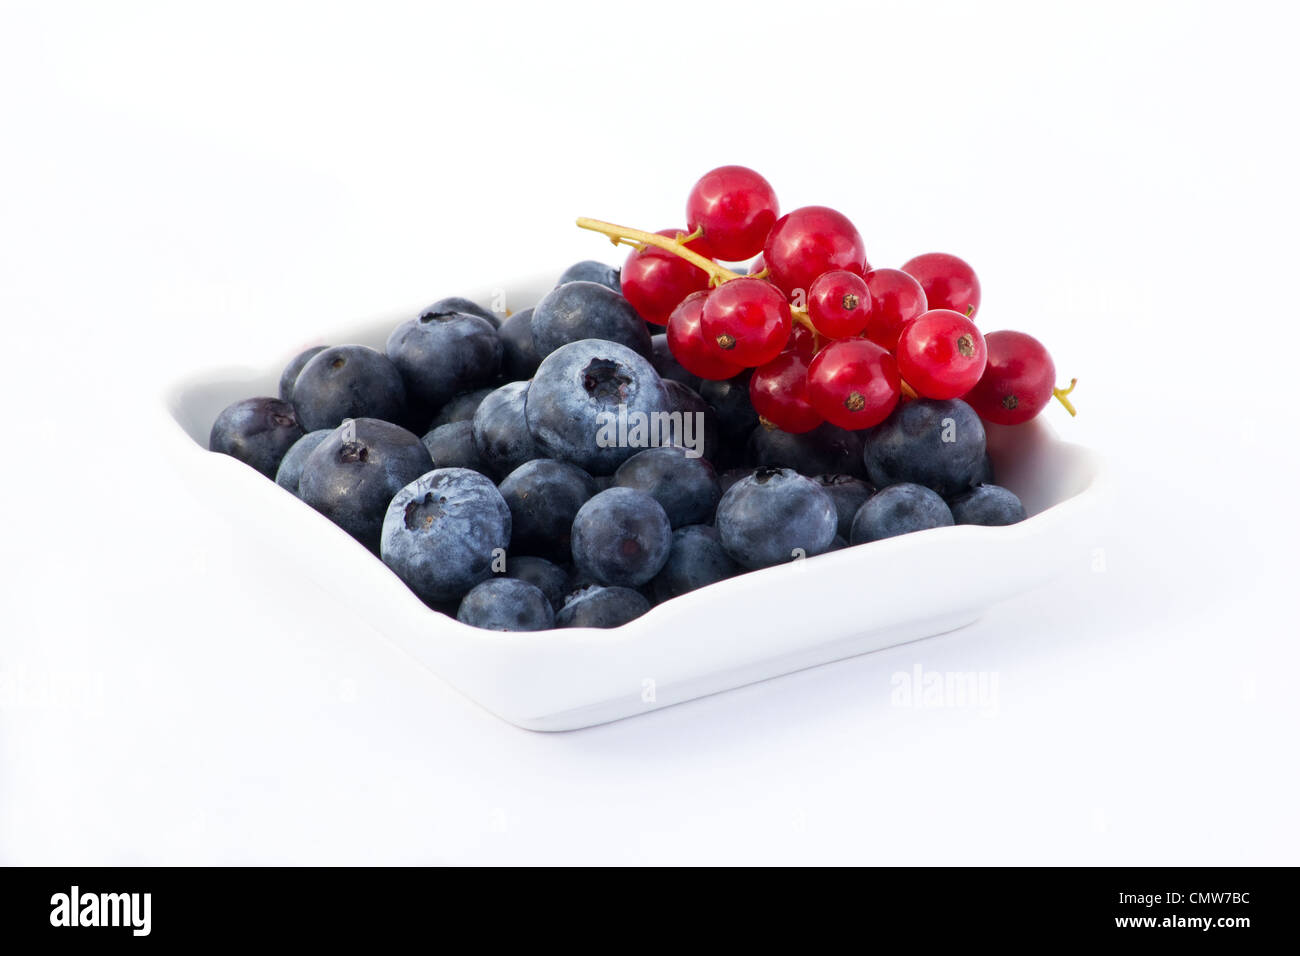 Blueberries and currants in a white dish on white background Stock Photo